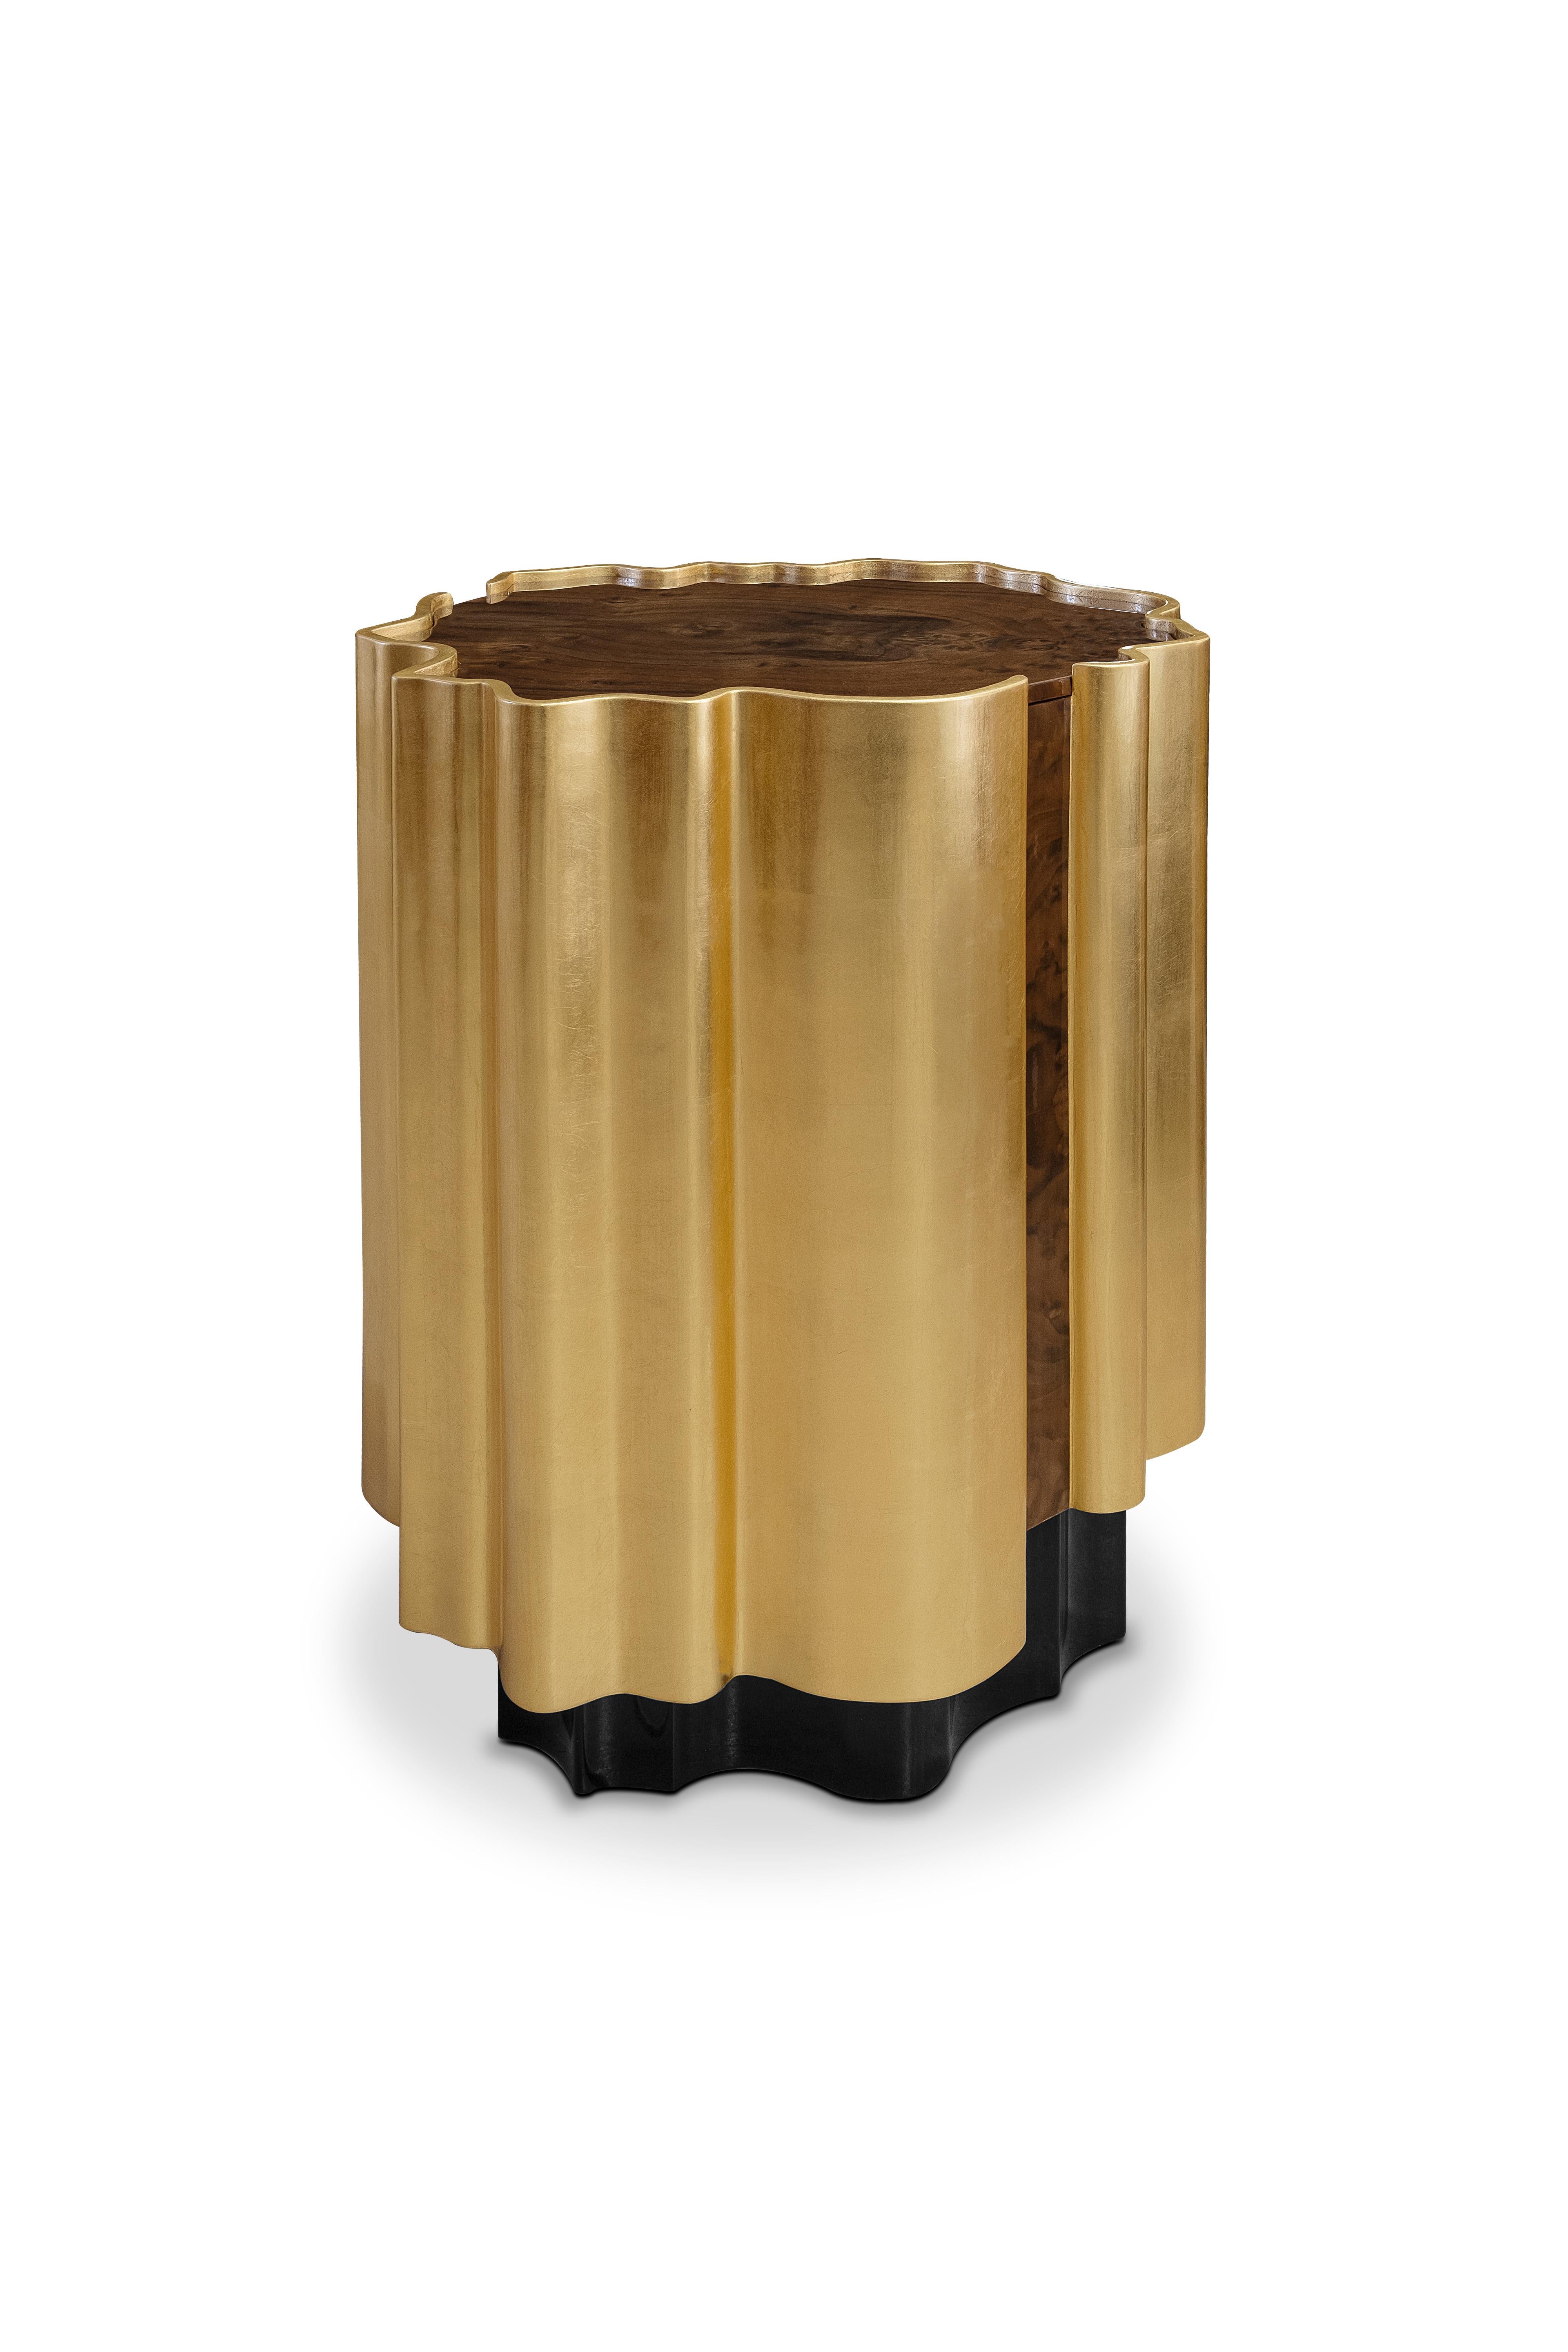 Lacquered 21st Century Horizon Side Table Wood Gold Leaf For Sale